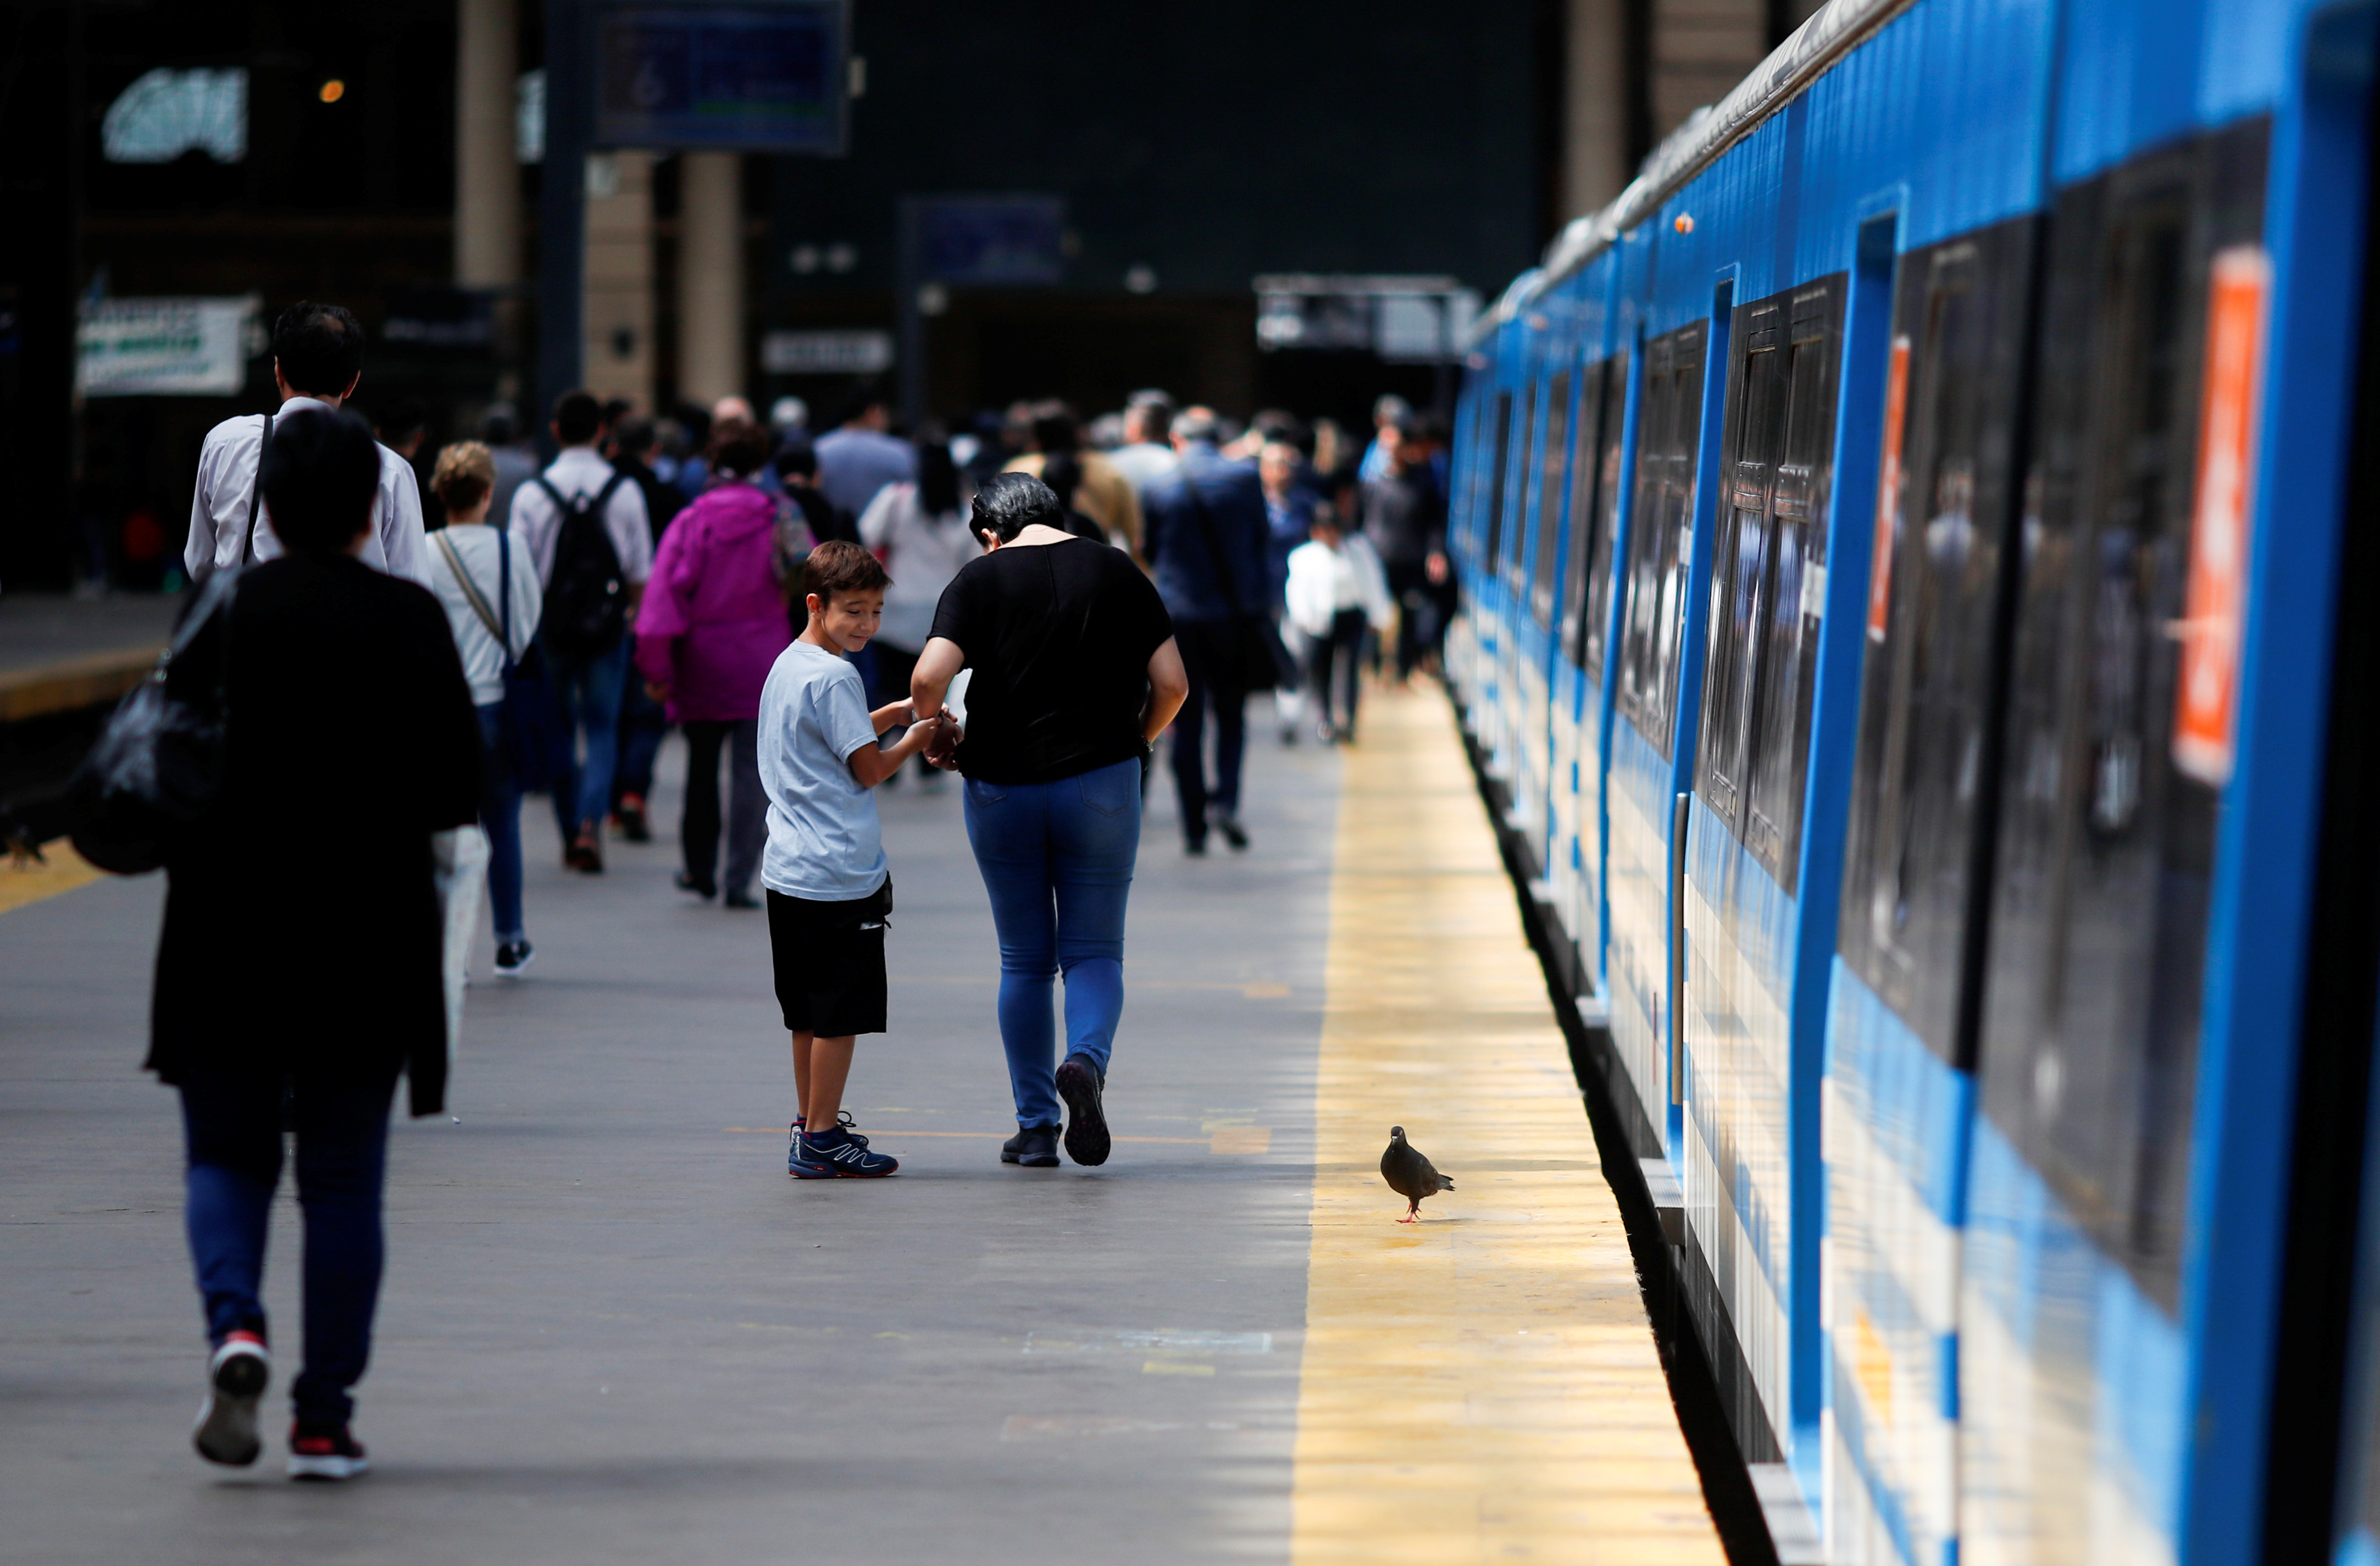 Argentina and its trains – the difficulty of getting back on track